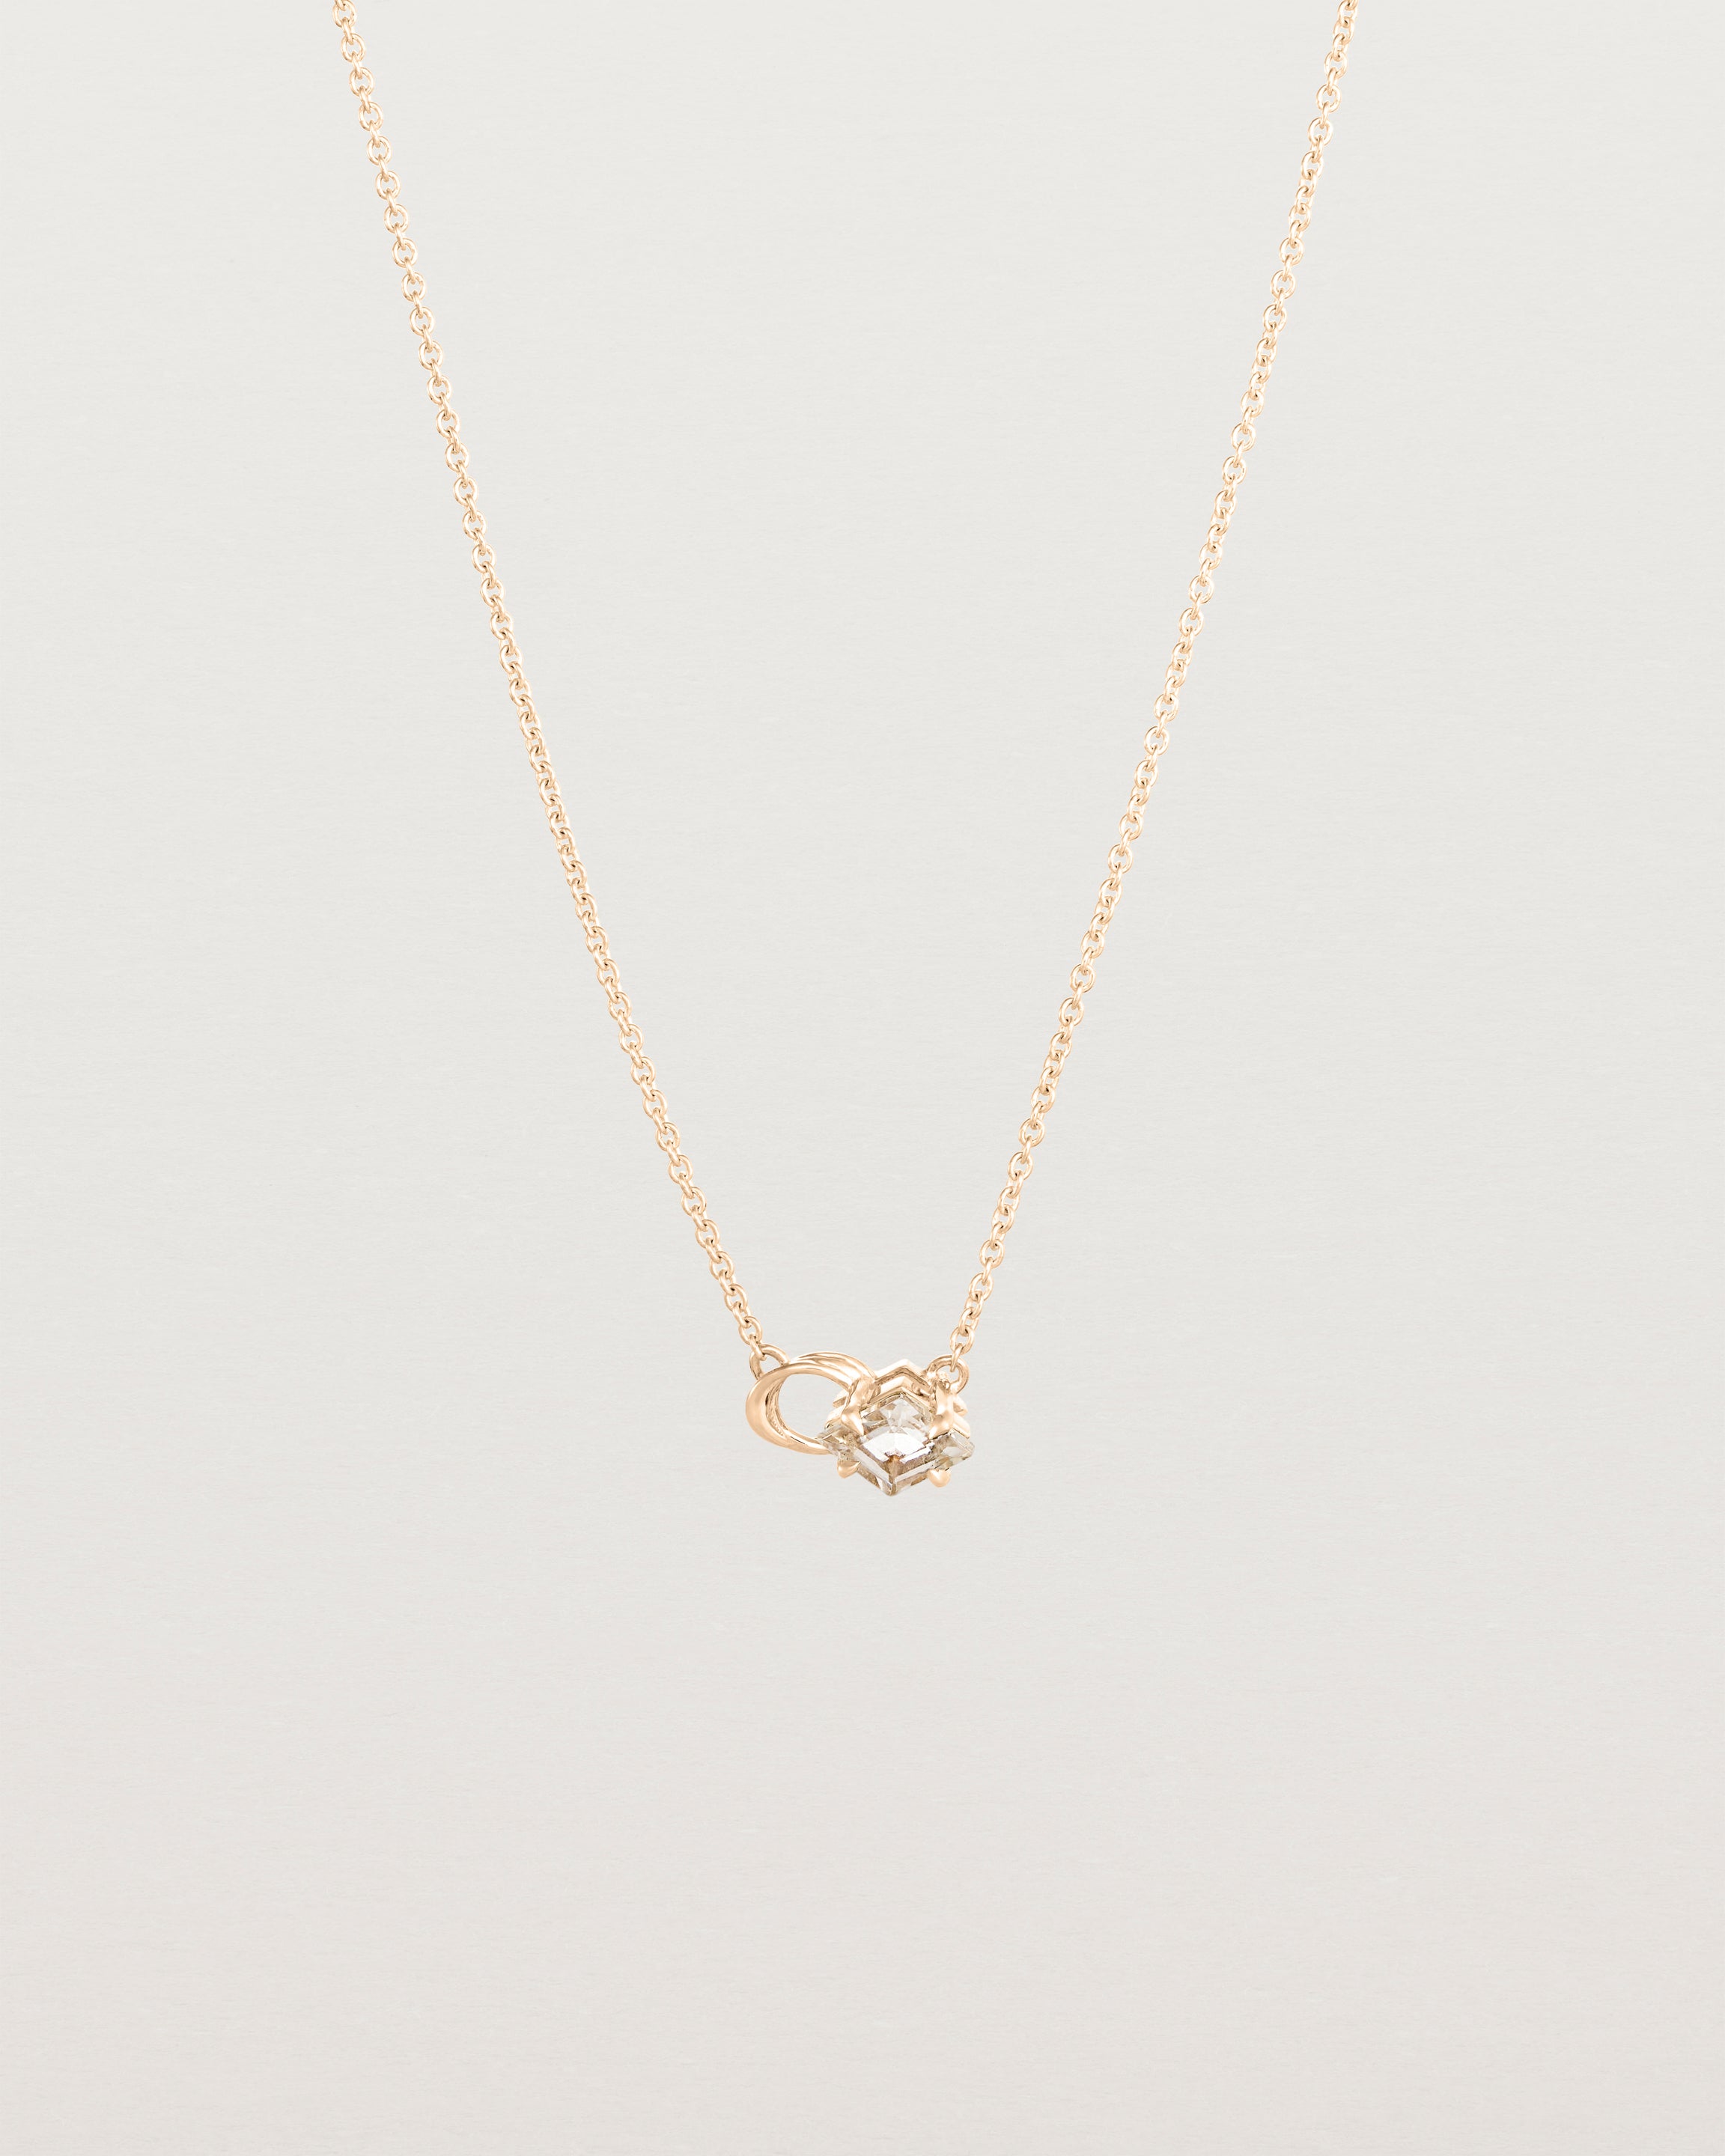 Front view of the Nuna Necklace | Savannah Sunstone in rose gold.